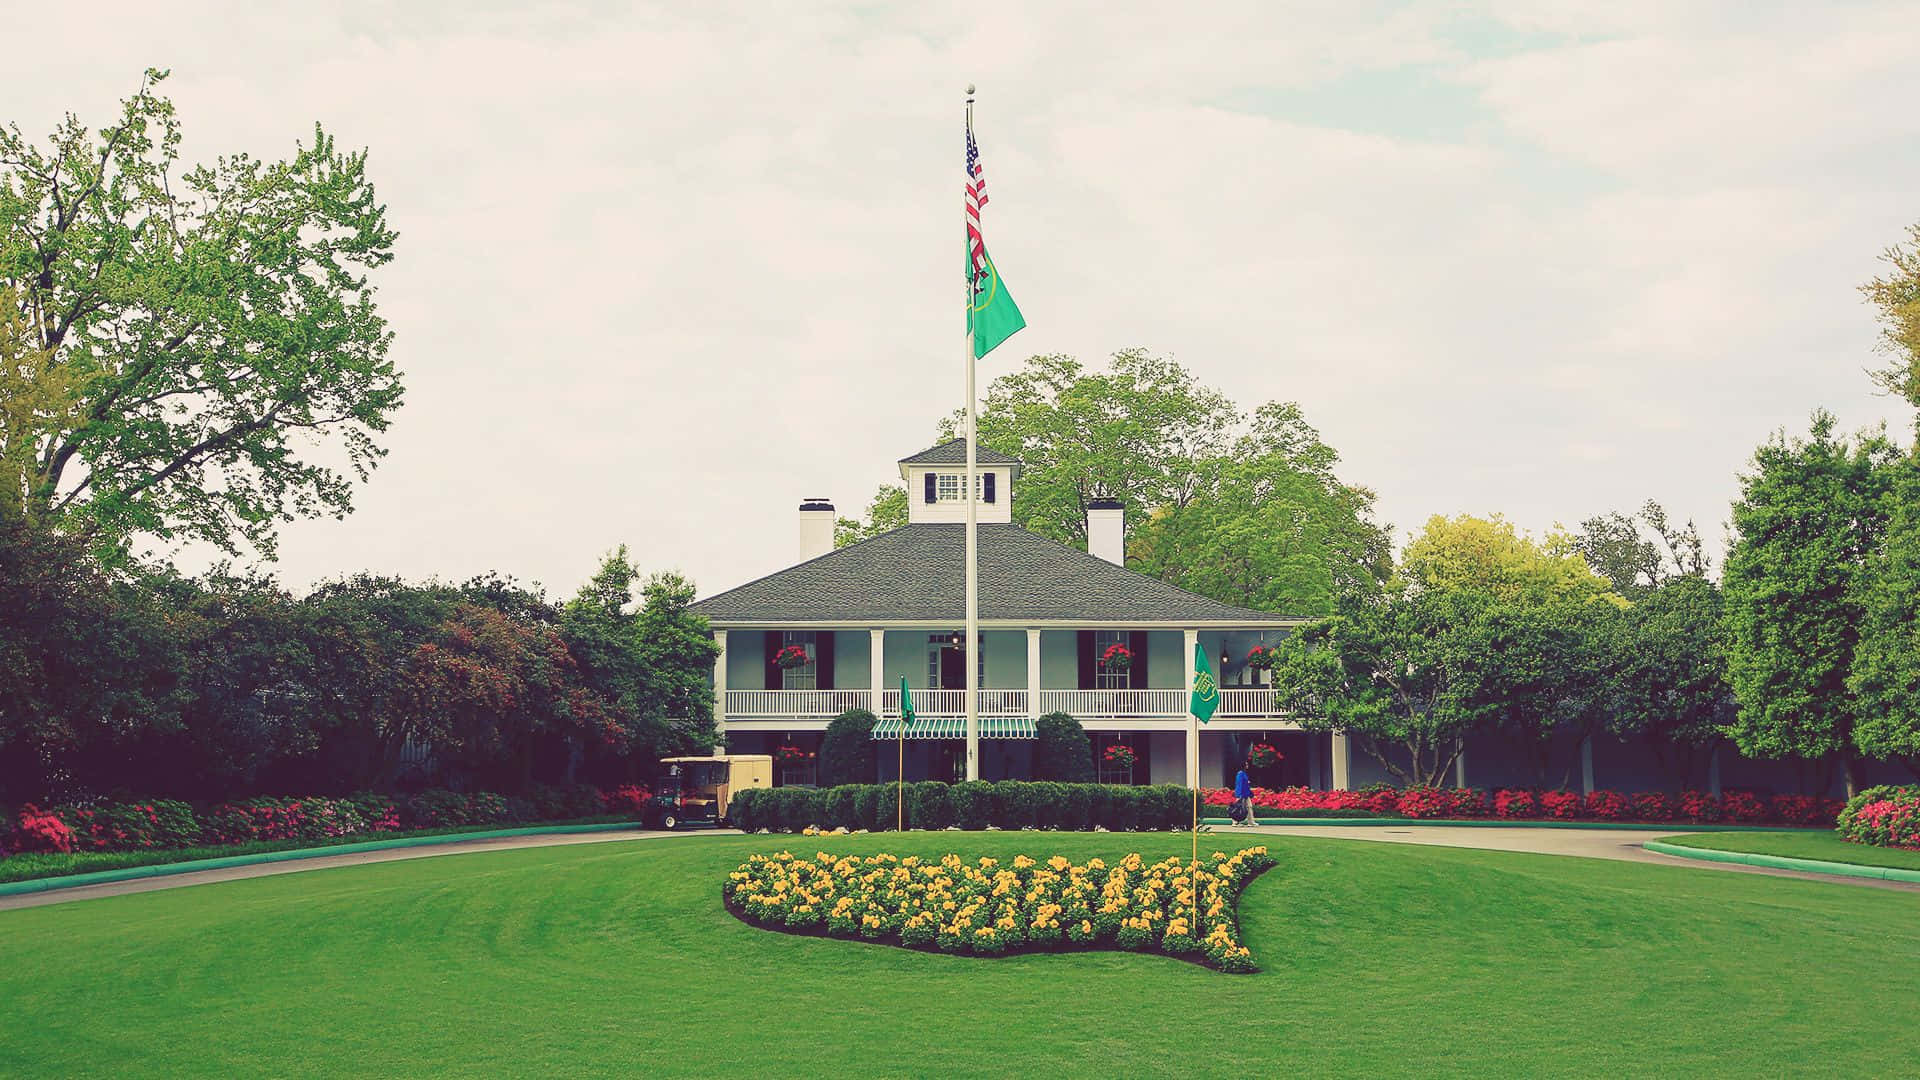 One of the World's Most Iconic Golf Courses - Augusta National Golf Course Wallpaper